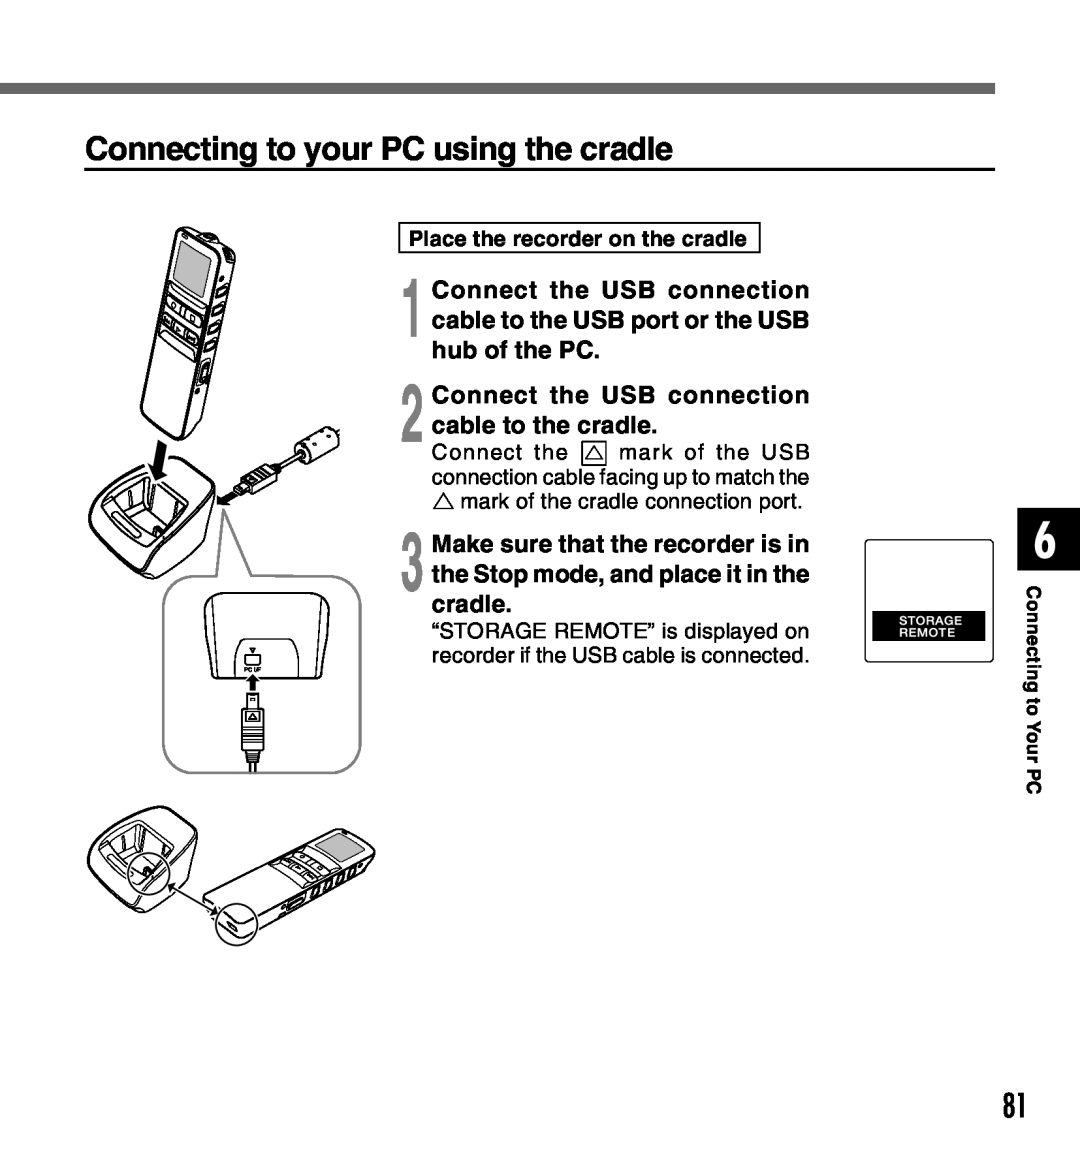 Olympus 2 manual Connecting to your PC using the cradle, Connect the USB connection cable to the cradle 